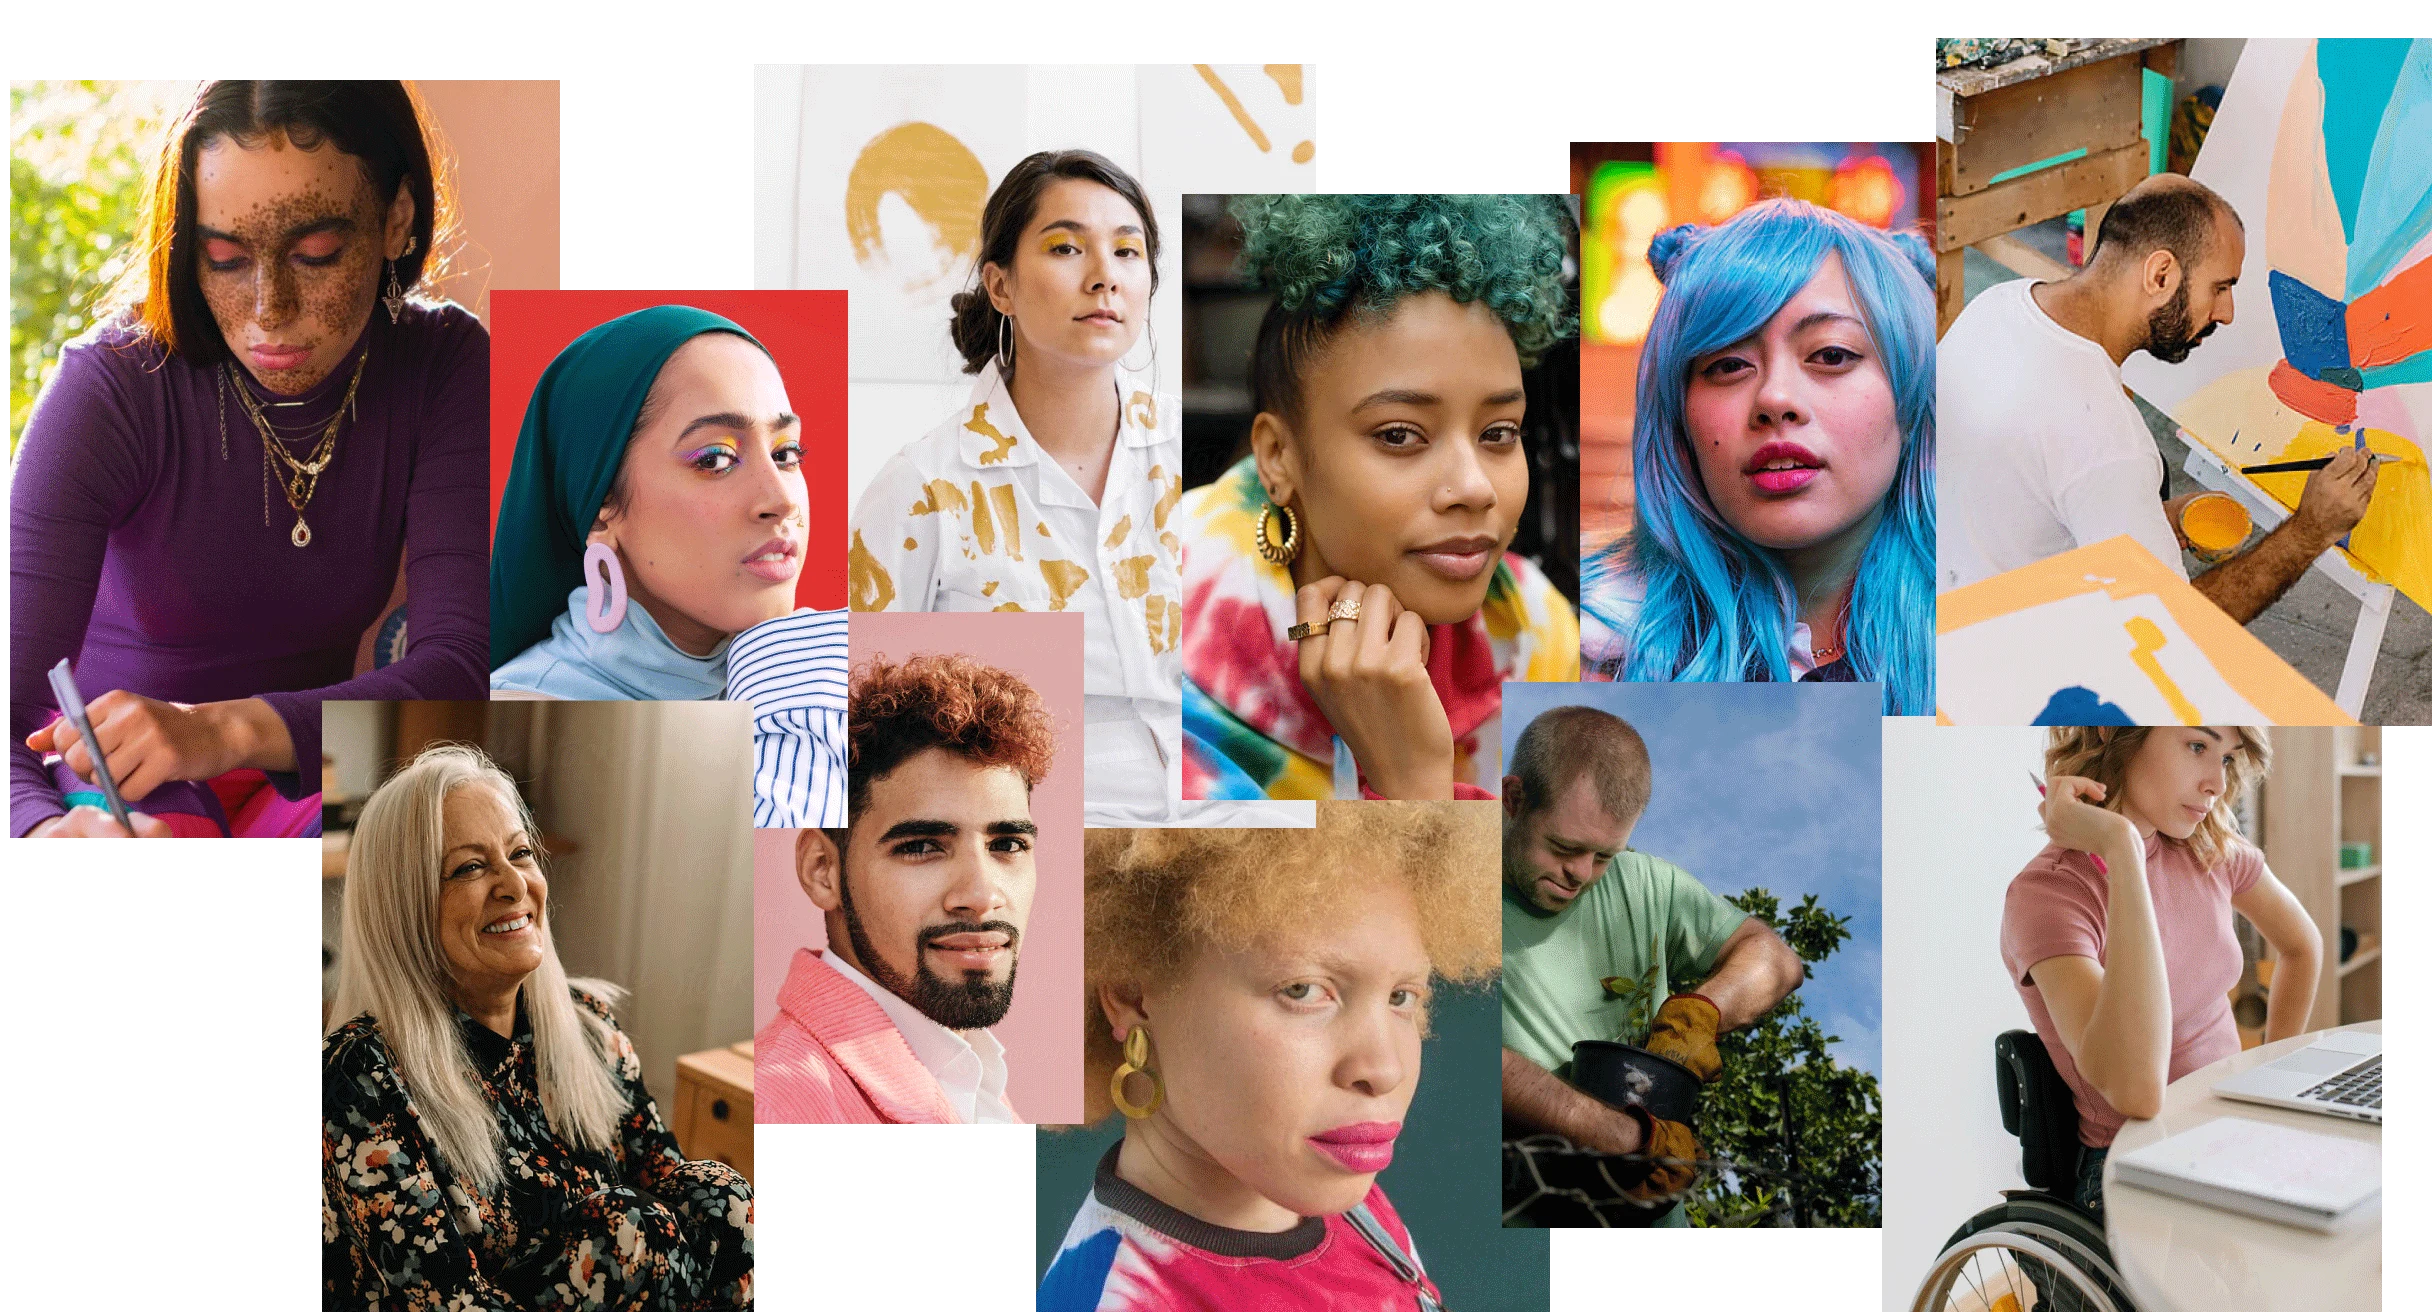 A collage of people depicting diverse races, ethnicities, genders, ages and abilities